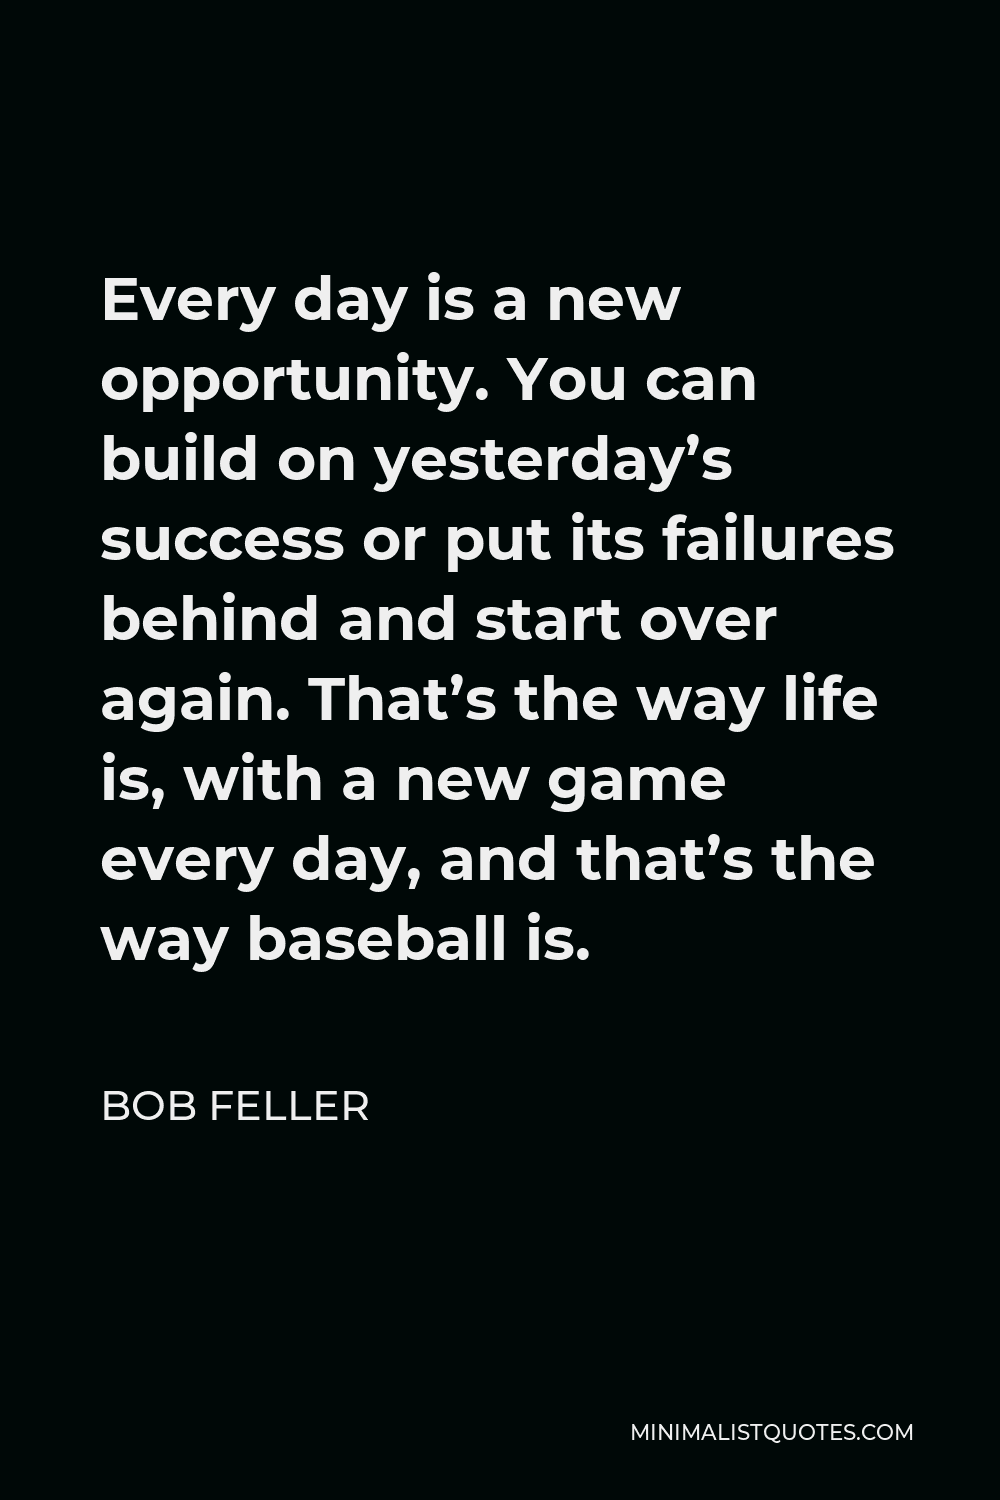 Bob Feller Quote - Every day is a new opportunity. You can build on yesterday’s success or put its failures behind and start over again. That’s the way life is, with a new game every day, and that’s the way baseball is.